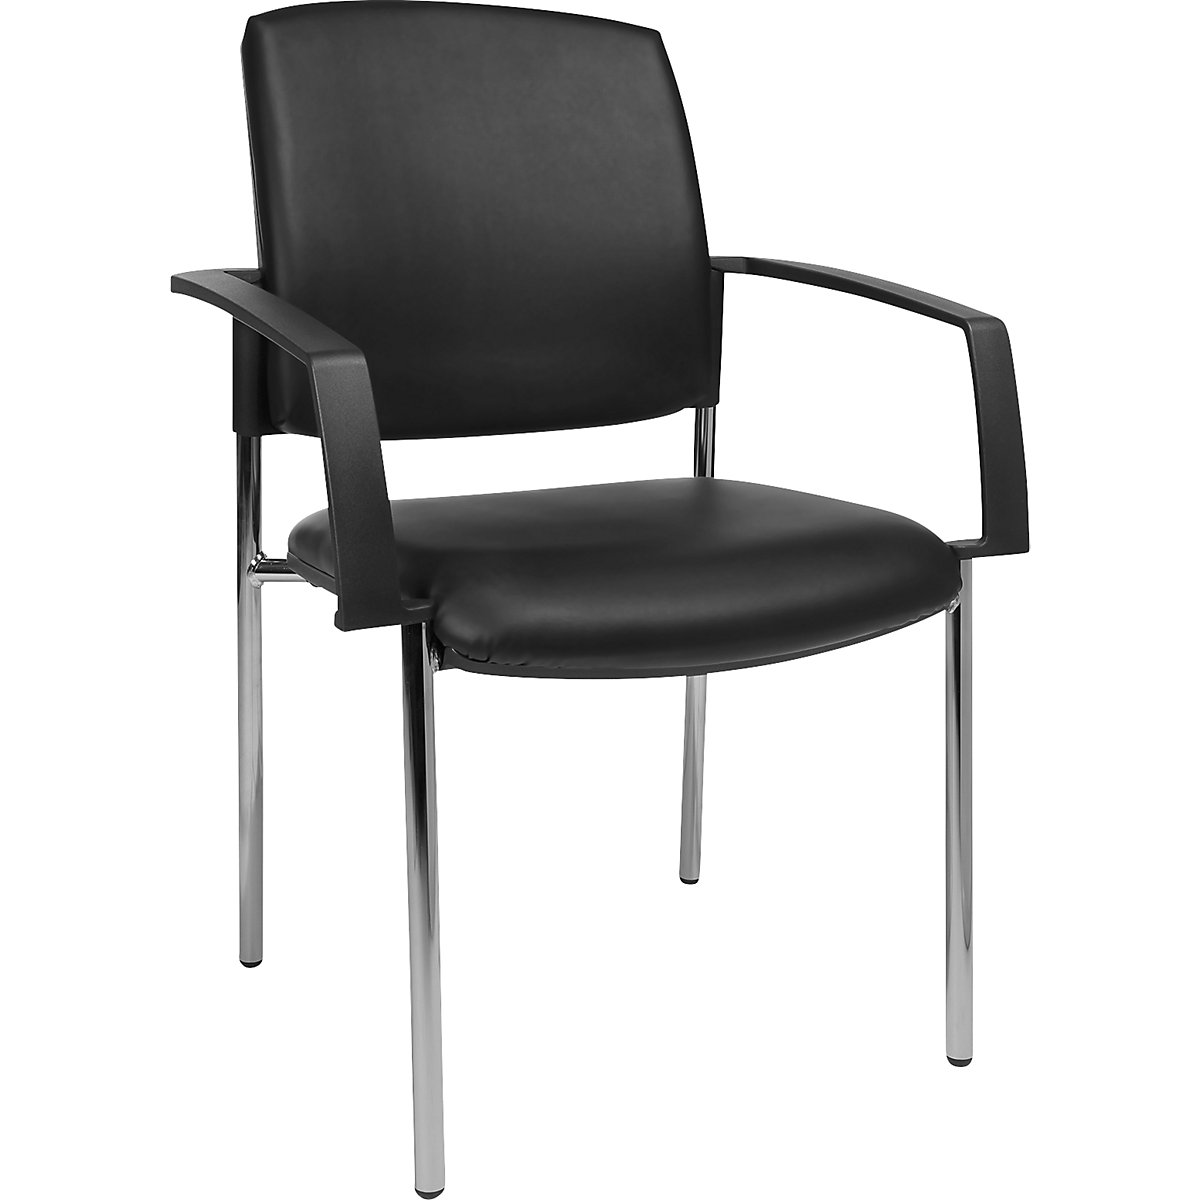 Topstar – Visitors' chairs with arm rests, pack of 2